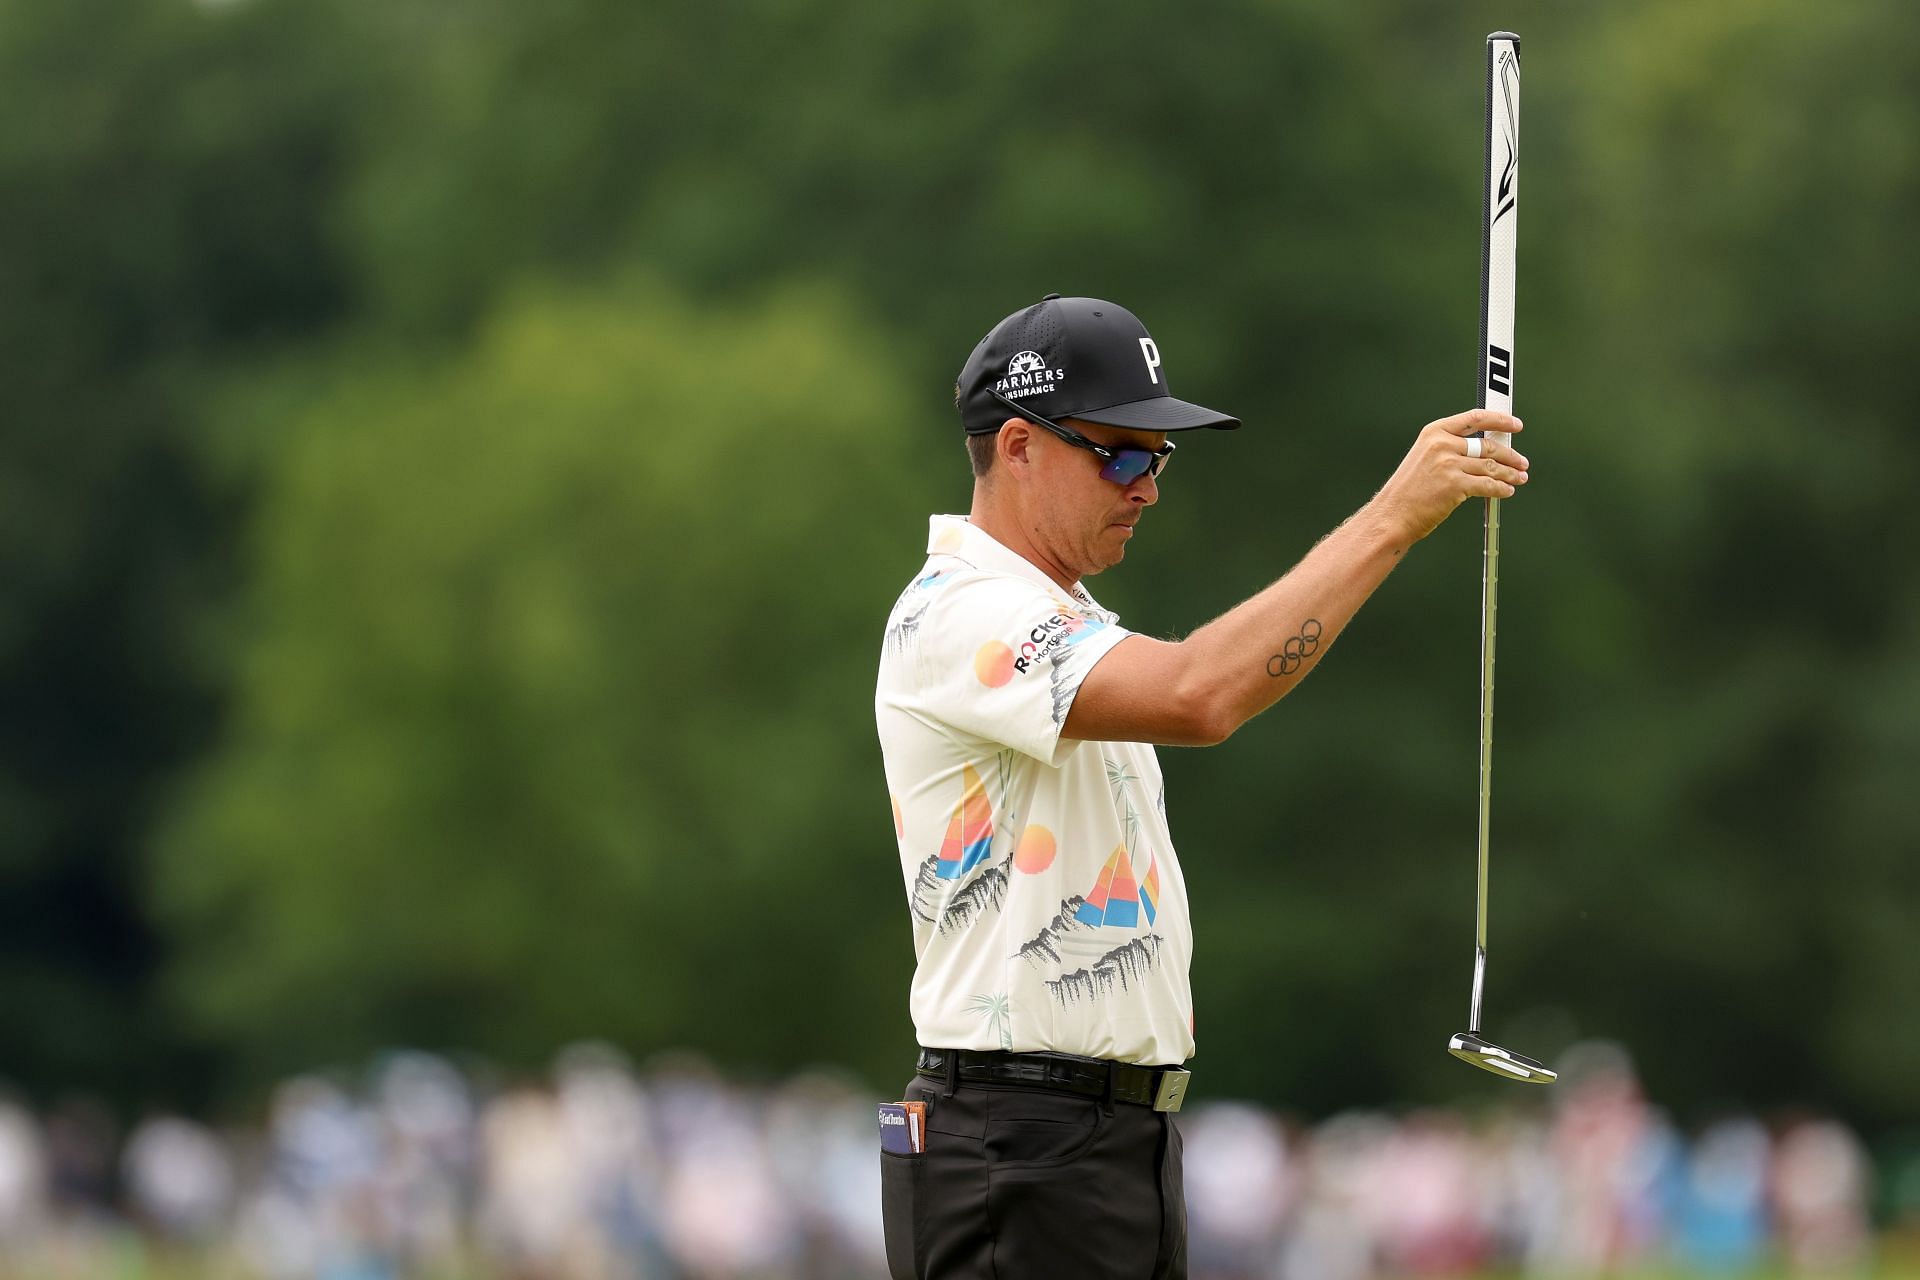 Rickie Fowler is in great form